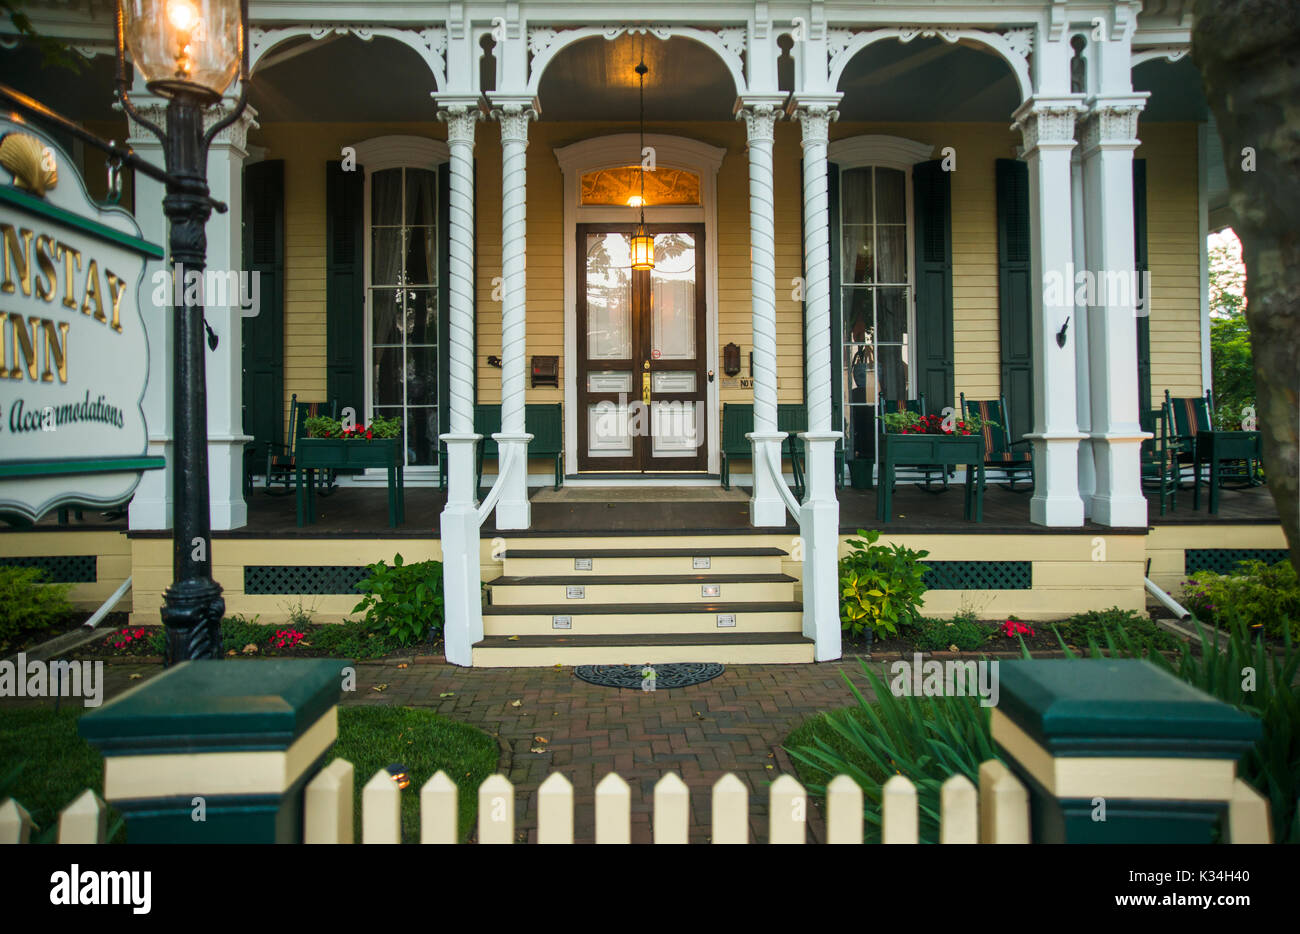 Victorian Architecture at beach Town Cape May, New Jersey. Front entrance with beautiful columns. Stock Photo